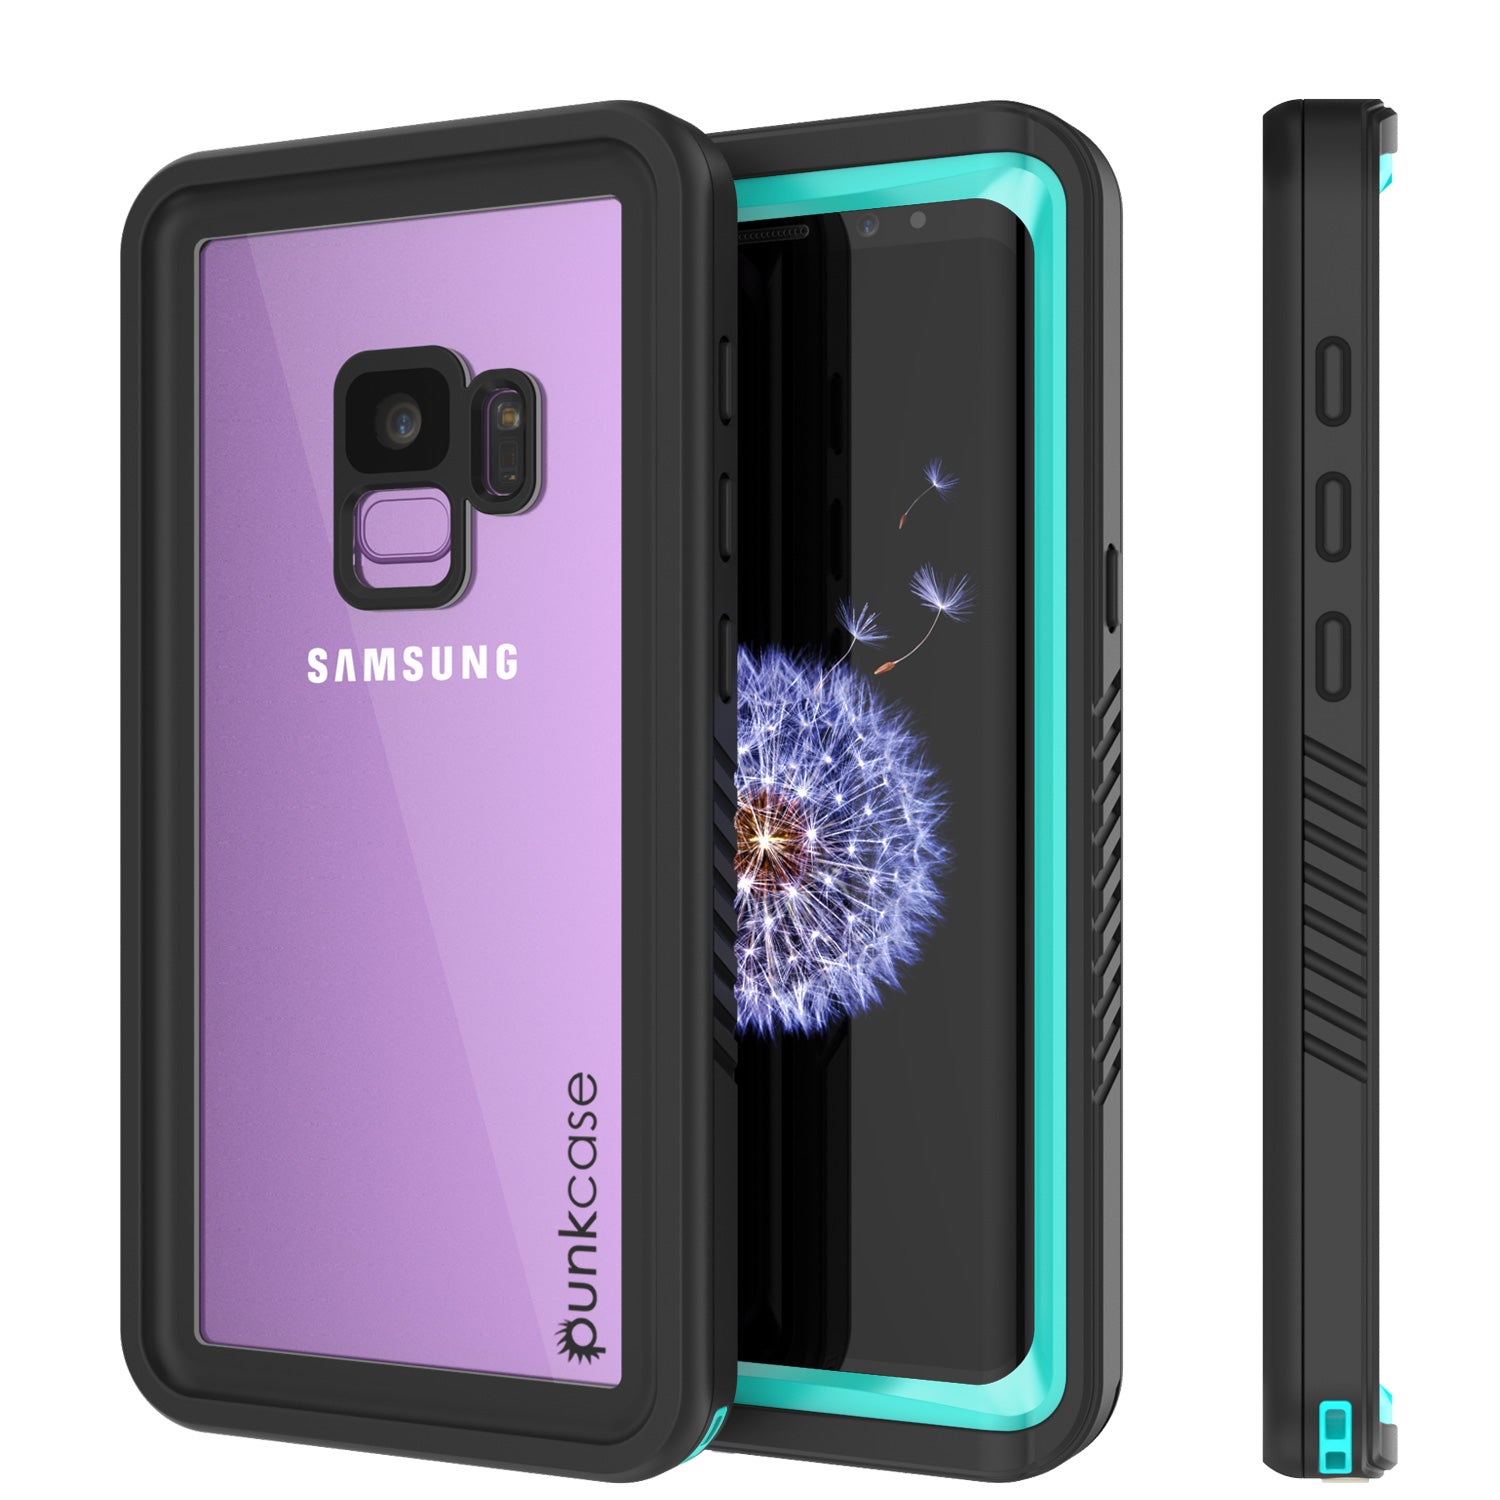 Galaxy S9 Plus, Punkcase Extreme W/ Built Screen Protector Case Teal